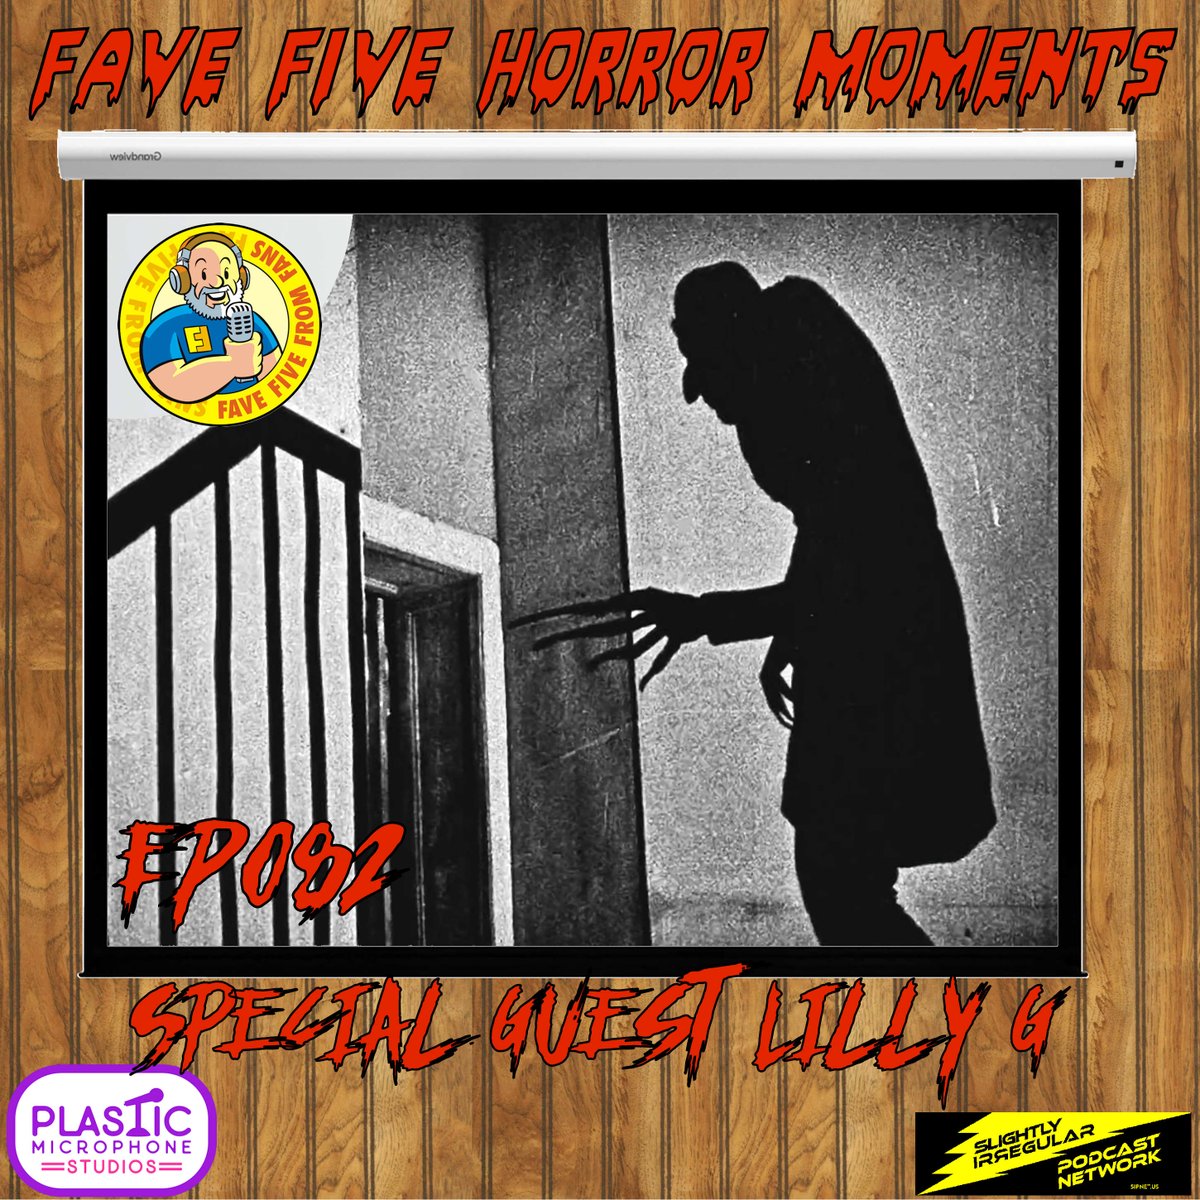 #NewEpisode 'FFFF Ep082 Fave Five Horror Moments' with Guest Lilly G. podcasters.spotify.com/pod/show/fave-…
#FFFF #podcast #podernfamily #Movie #MutantFam #HorrorFam  #FrighteningFam #HorrorCommunity #EveryoneIsFam #SciFiFam #SIPNetwork   #OLpod #PodTime #FollowPyramid #TeamFollowBack